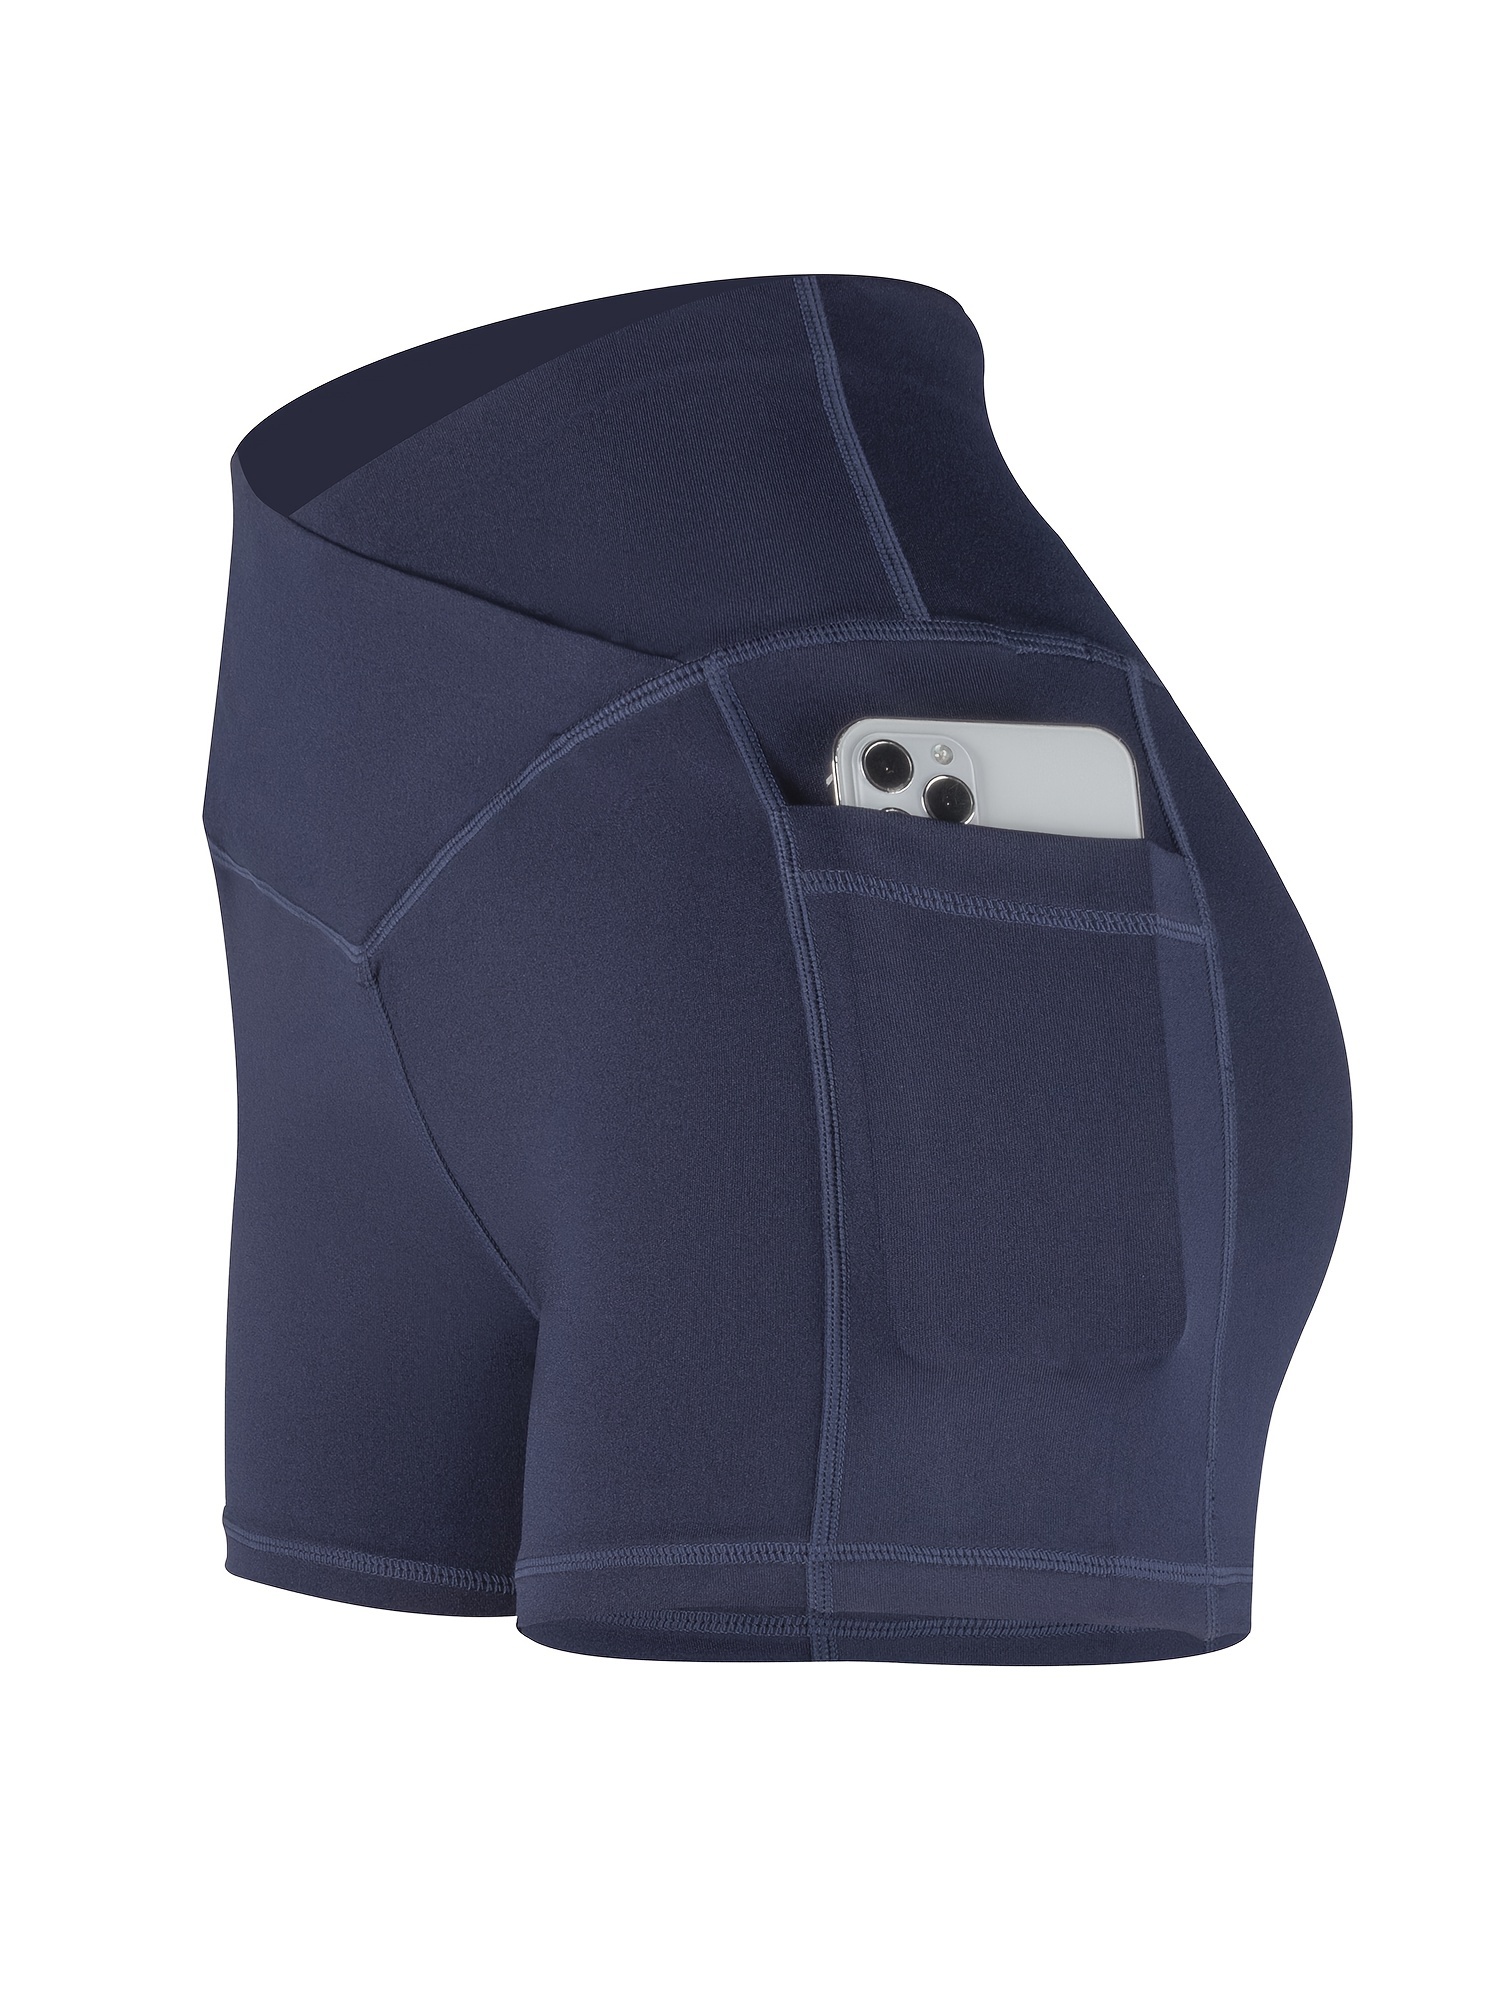 High Waist Buttery Soft Yoga Luxe 7 Shorts With Hidden Pocket For Workout,  Running, And Athletic Fitness No Camel Toe Design T230421 From Babiq08,  $12.56